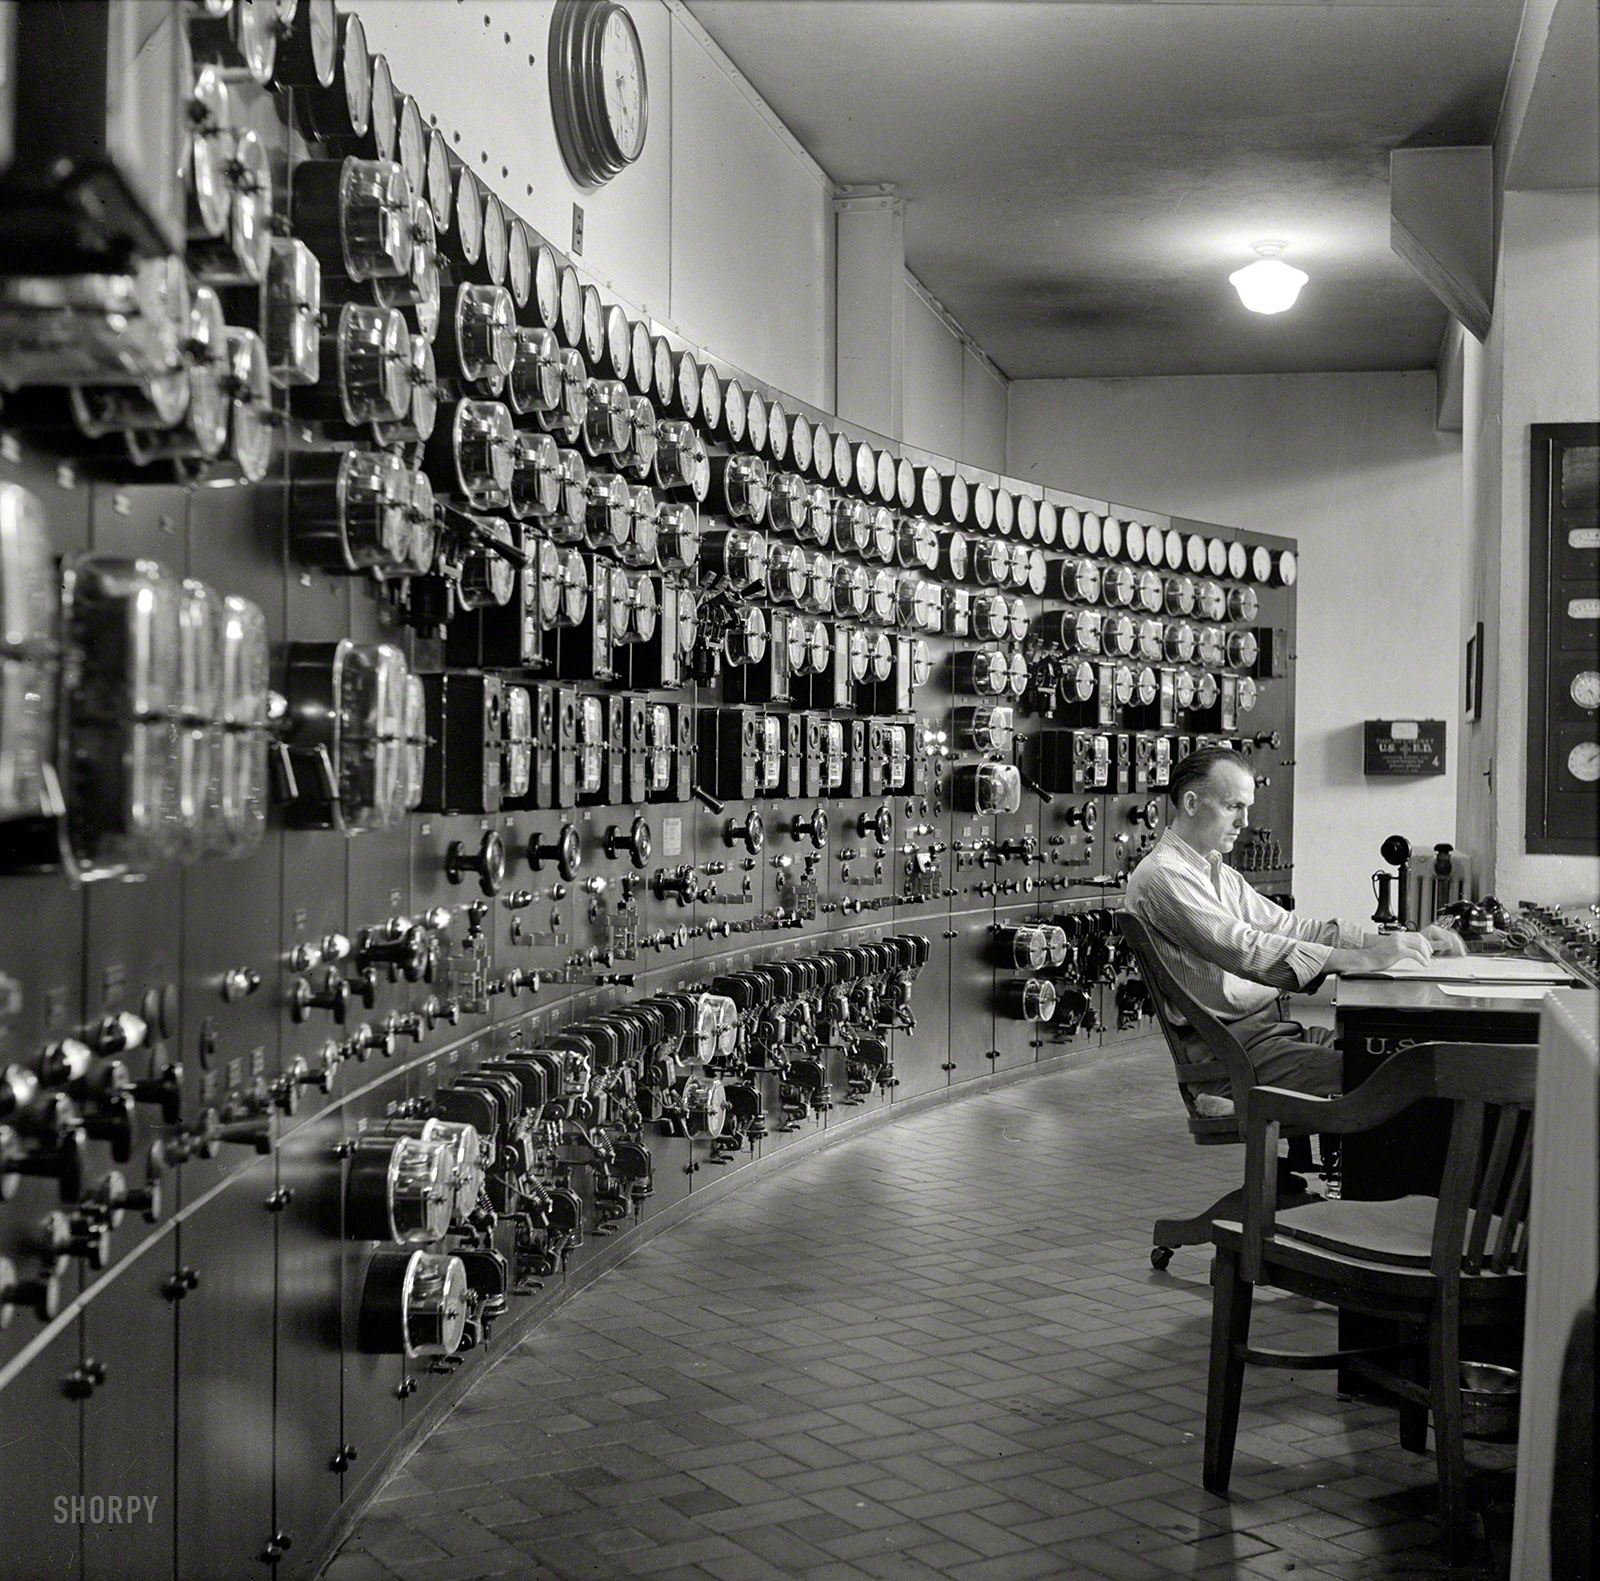 September 1940. "Control room, waterworks. Conduit Road, Washington, D.C." Photo by Edwin Rosskam, Office of War Information. View full size.